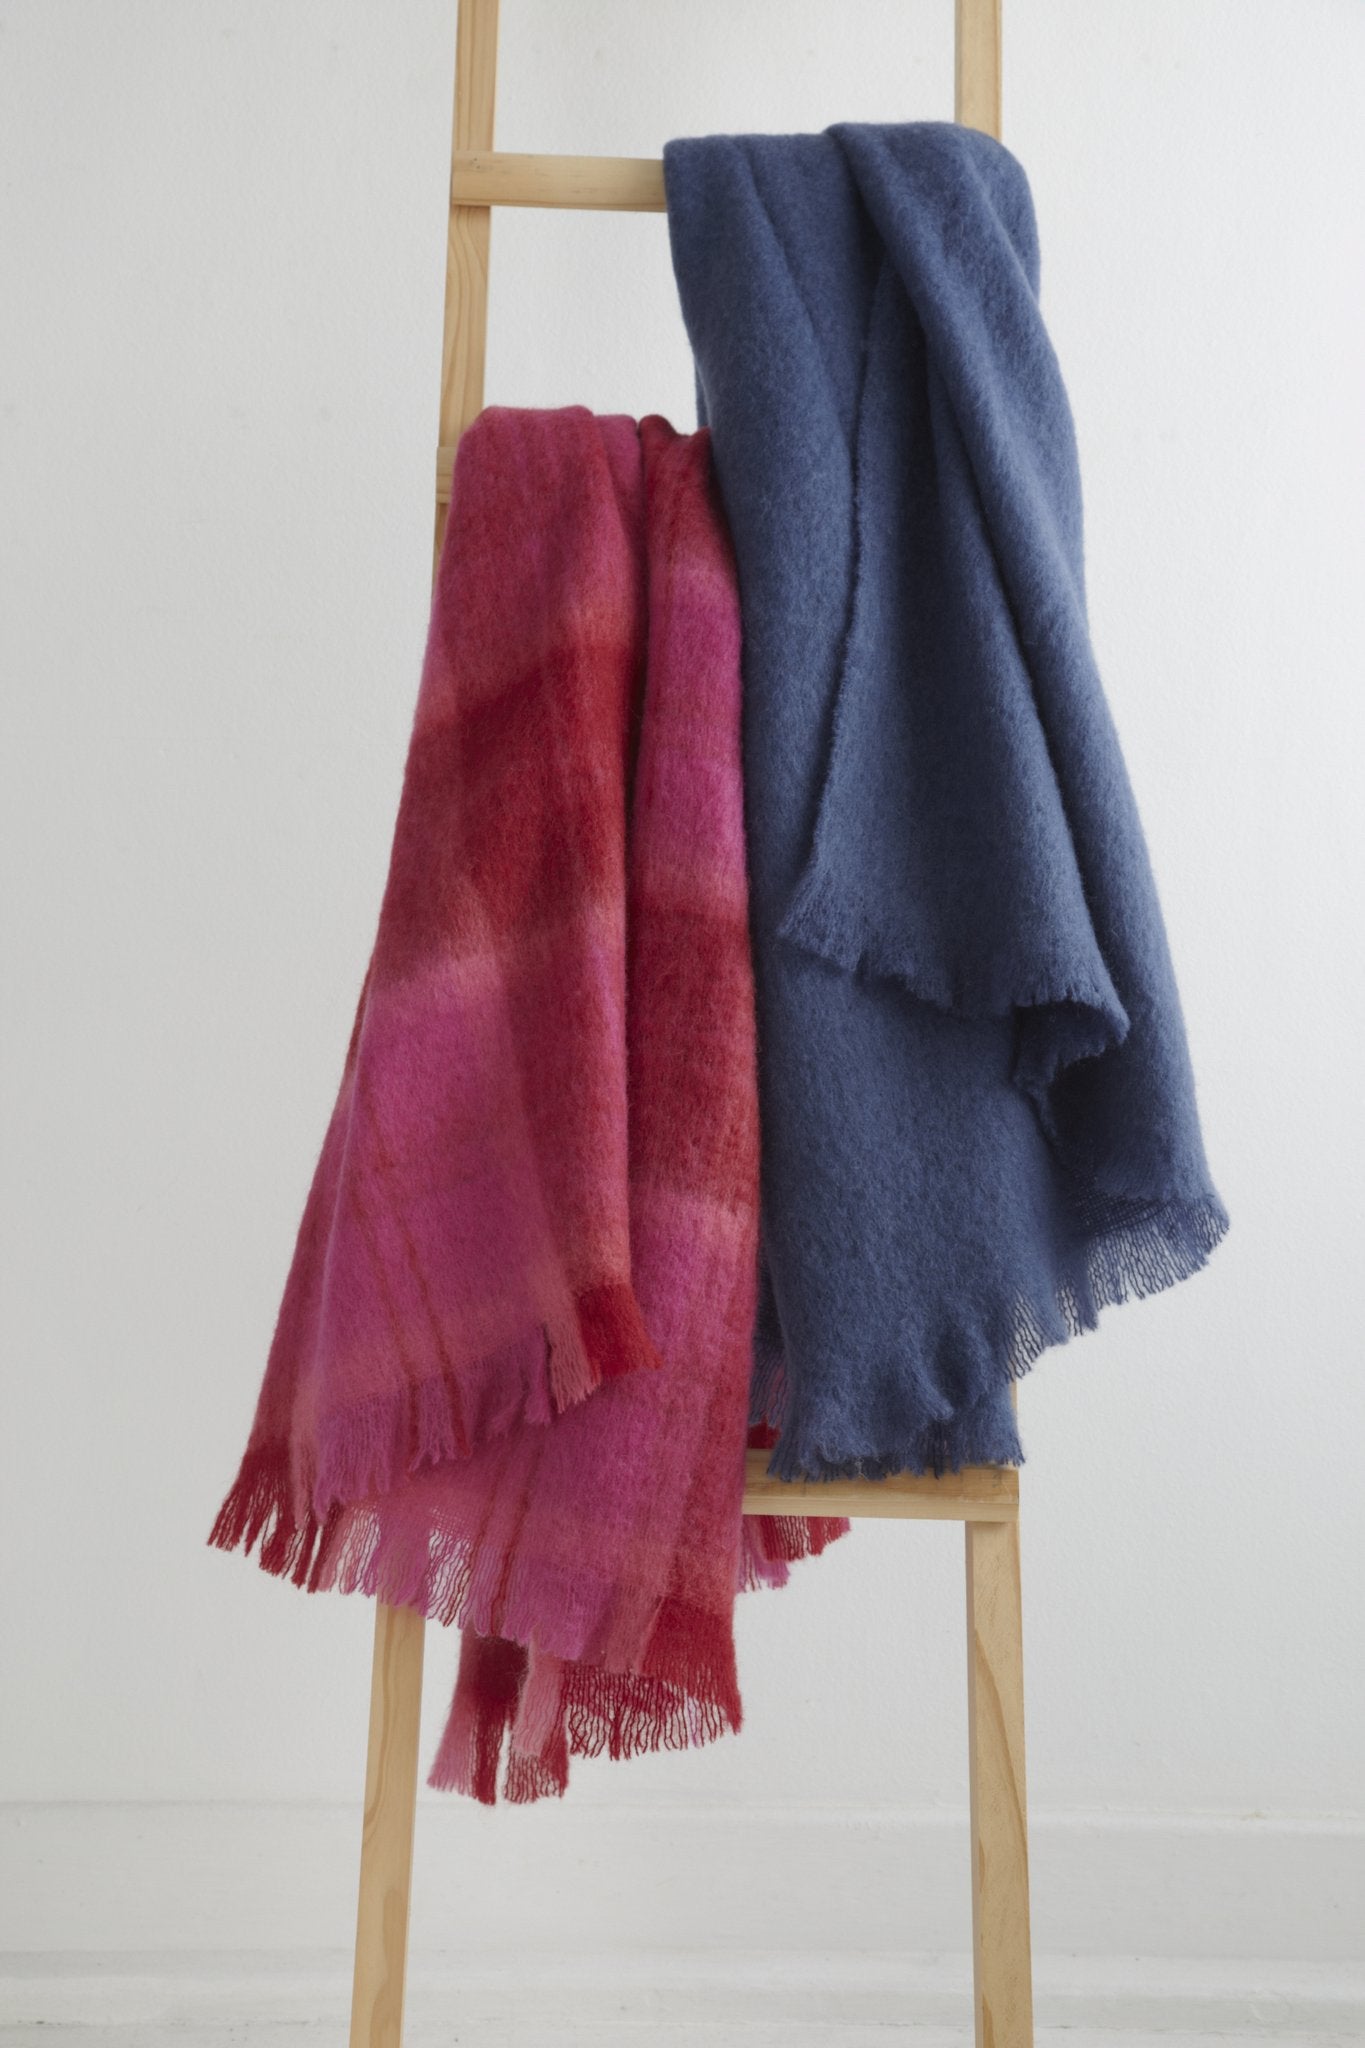 Soft Mohair luxury throws from Glamorous Goat.  Mohair throws available at My Sanctuary